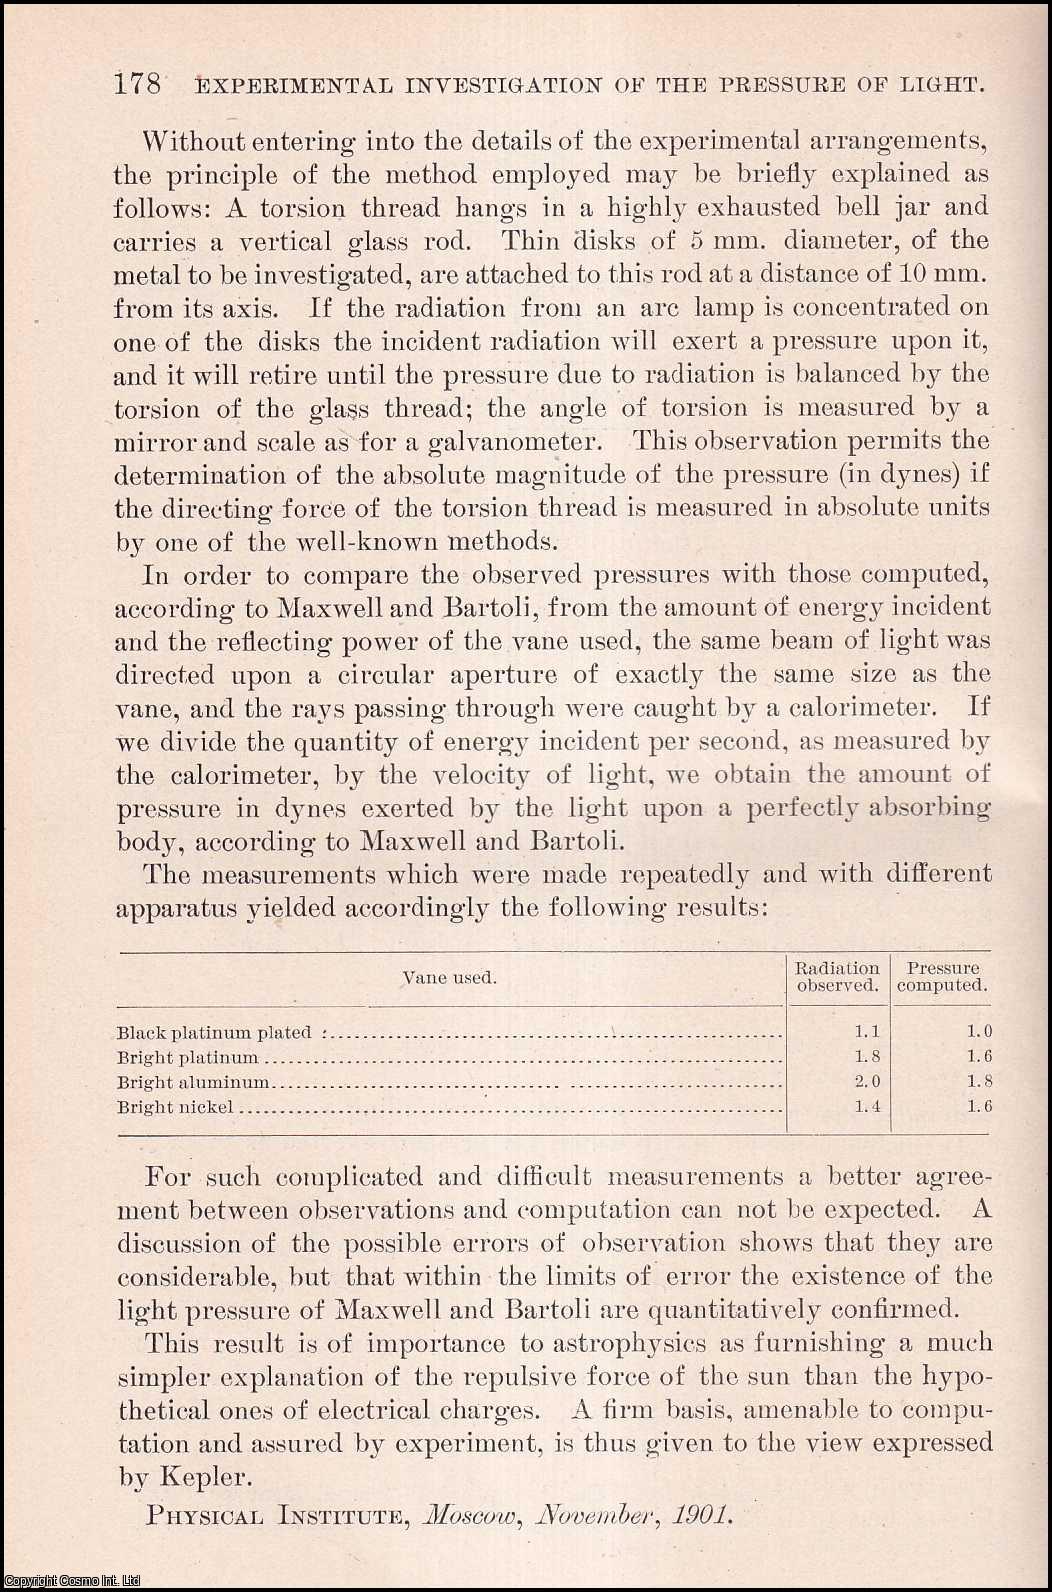 Peter Lebedew - Experimental Investigation of The Pressure of Light. An original article from the Report of the Smithsonian Institution, 1902.